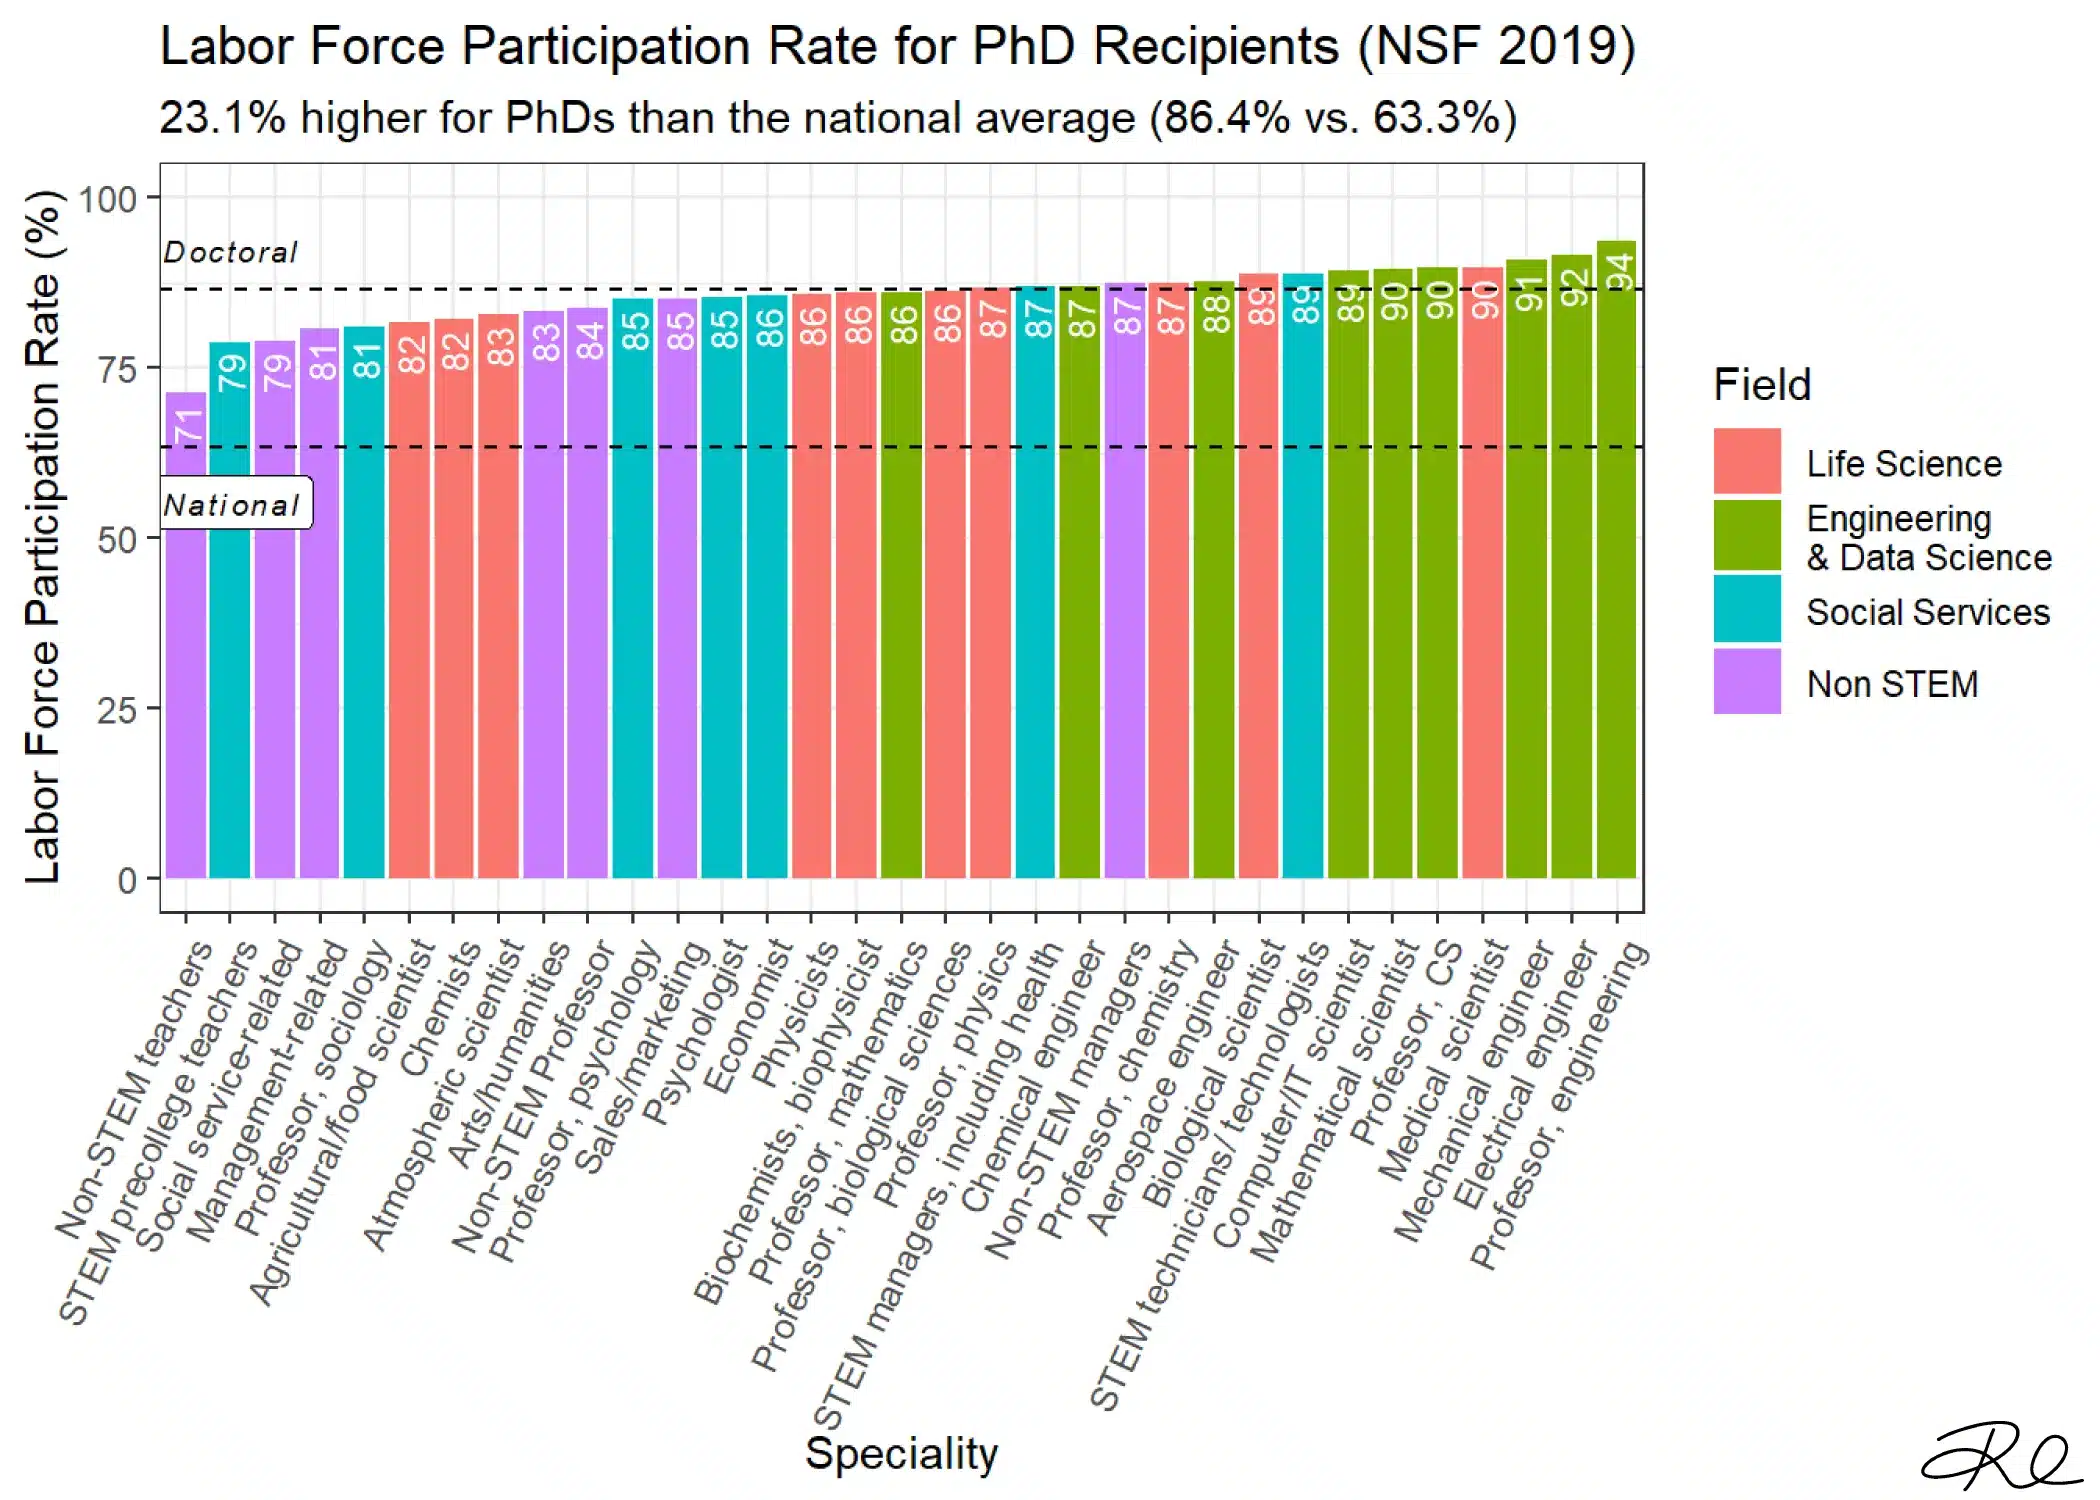 Labor force participation rates among doctoral recipients is 23.1% higher than the national average (86.4% vs. 63.3%). 